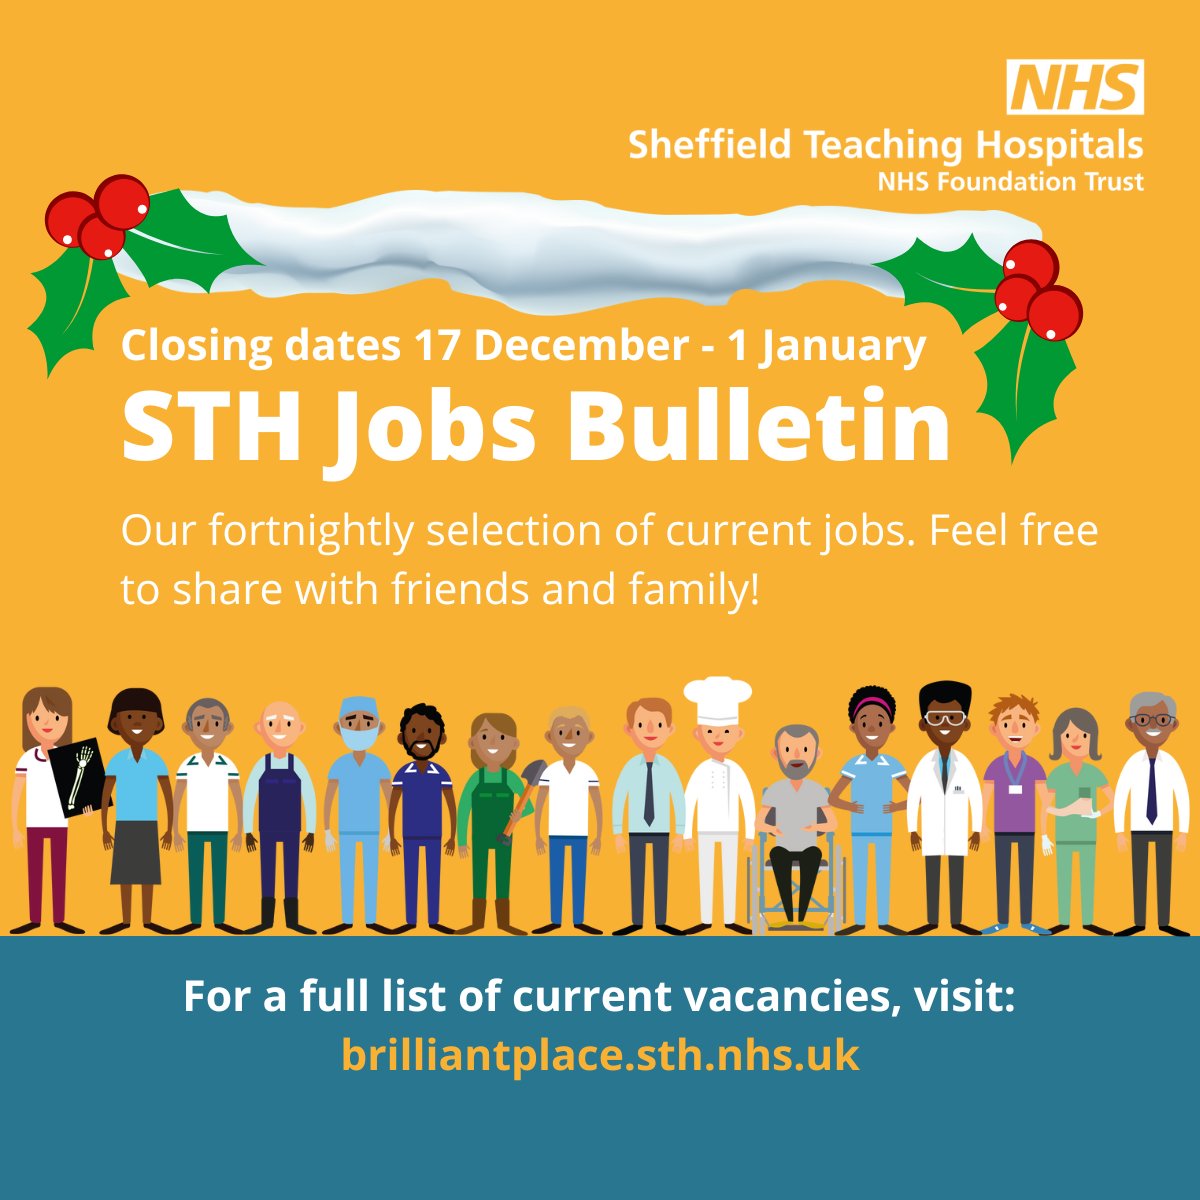 We still have plenty of roles open in our latest Jobs Bulletin 👇 brilliantplace.sth.nhs.uk/pdf/STH%20Jobs…